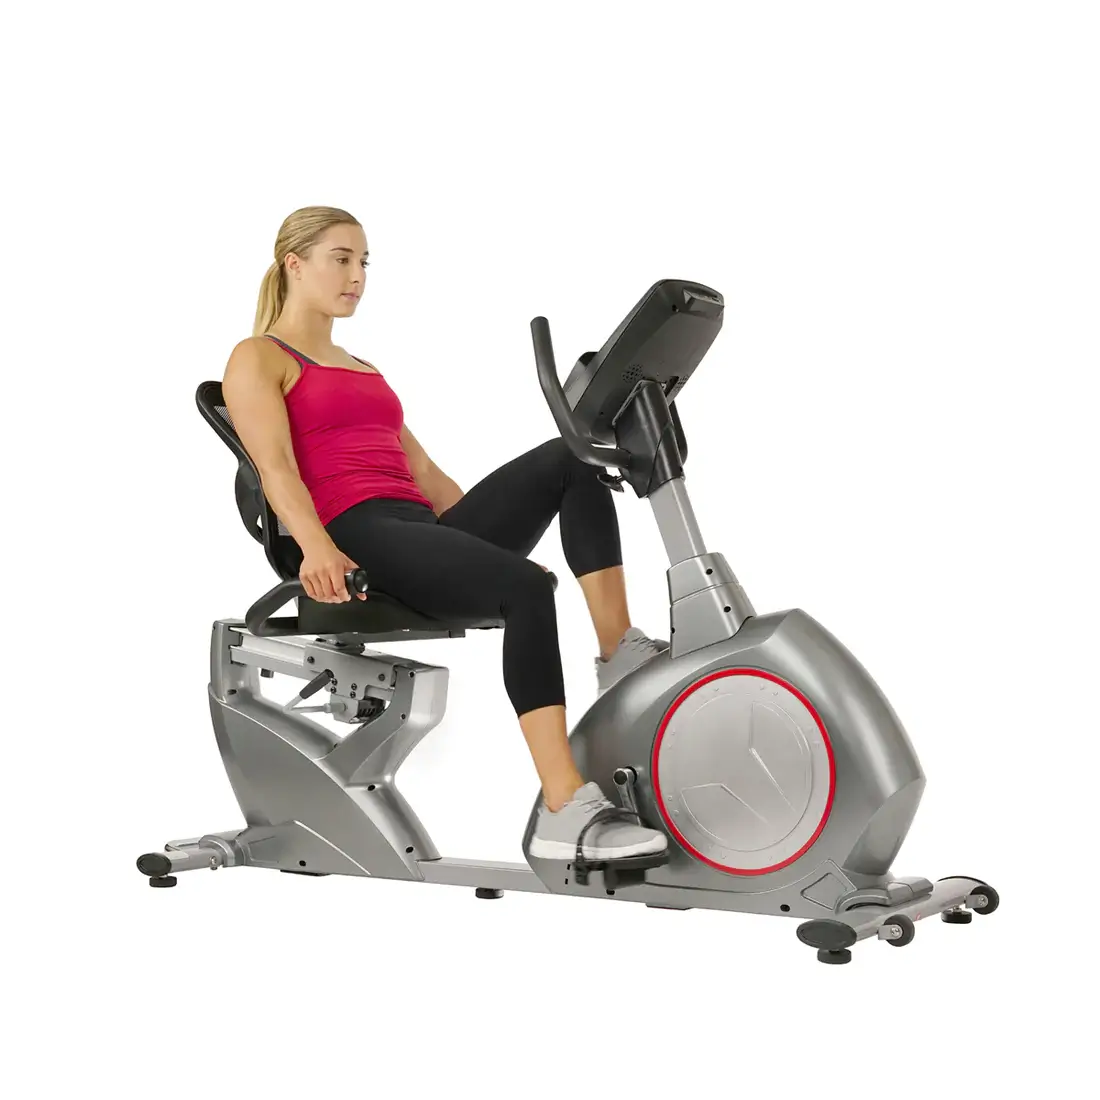 https://www.gympros.com/wp-content/uploads/2022/08/sunny-health-fitness-bikes-stationary-recumbent-bike-exercise-bike-self-powered-cycling-USB-charging-function-SF-RB4880-02_1100x.webp